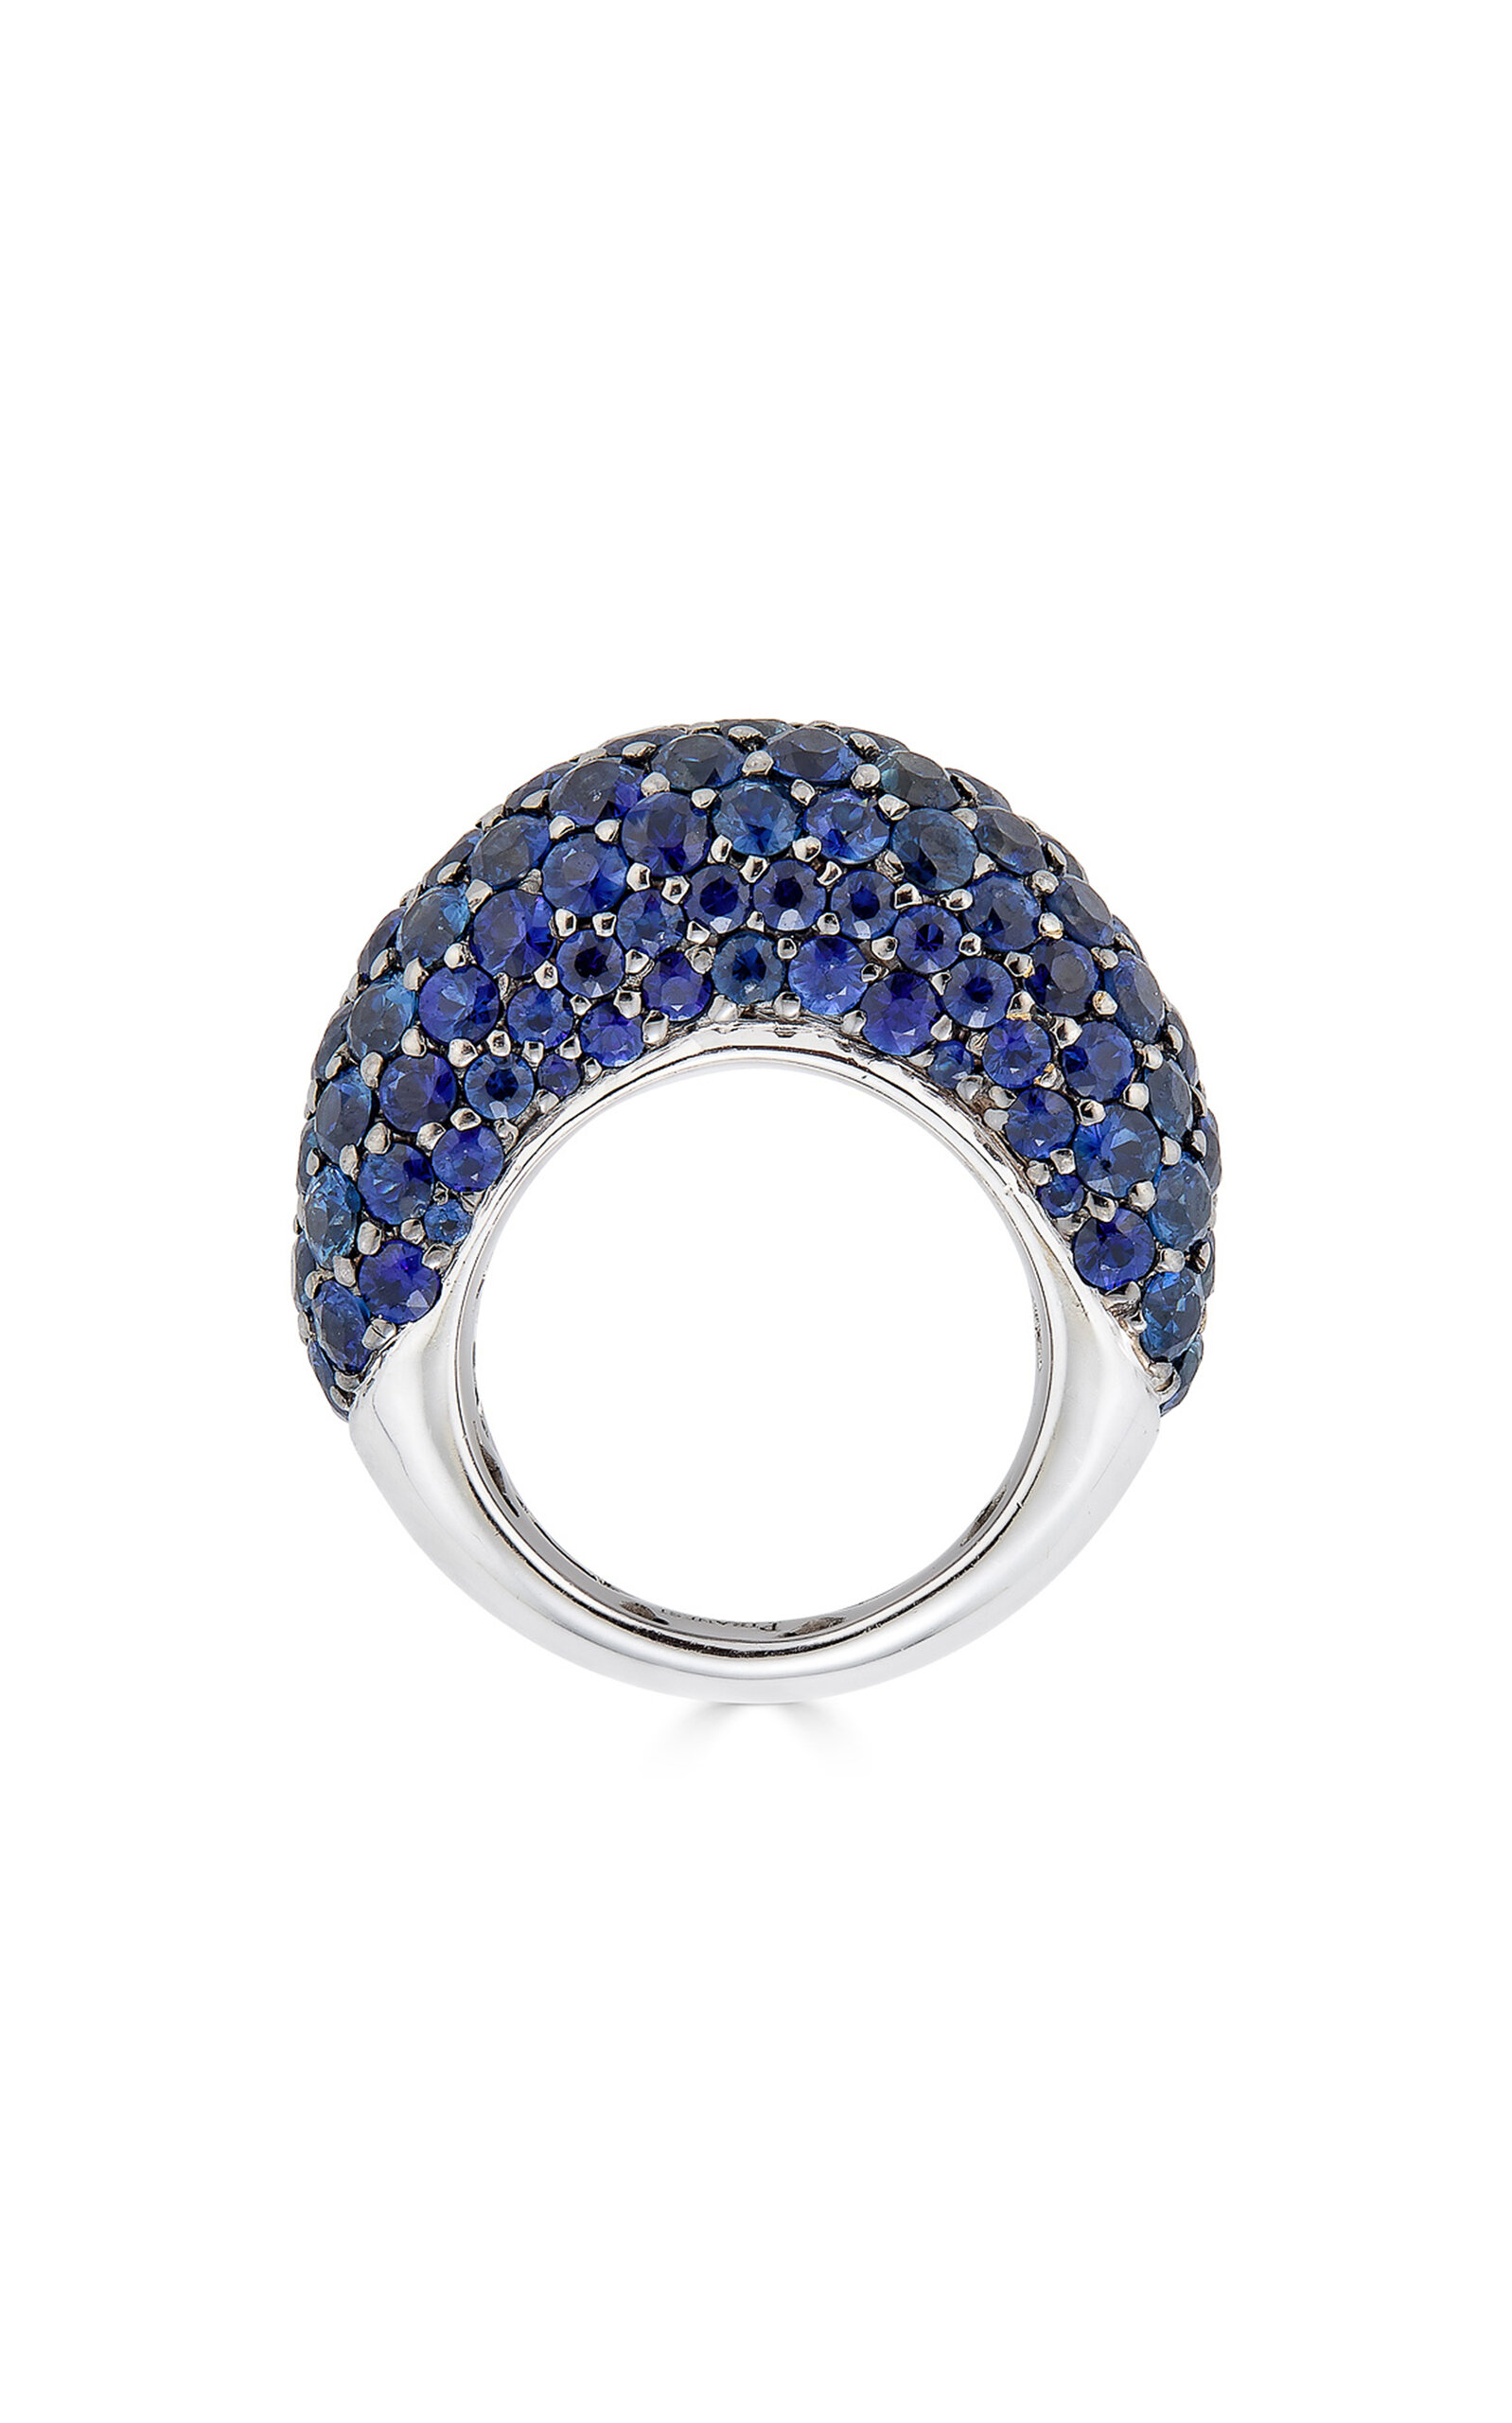 18K White Gold Sapphire Dome Ring